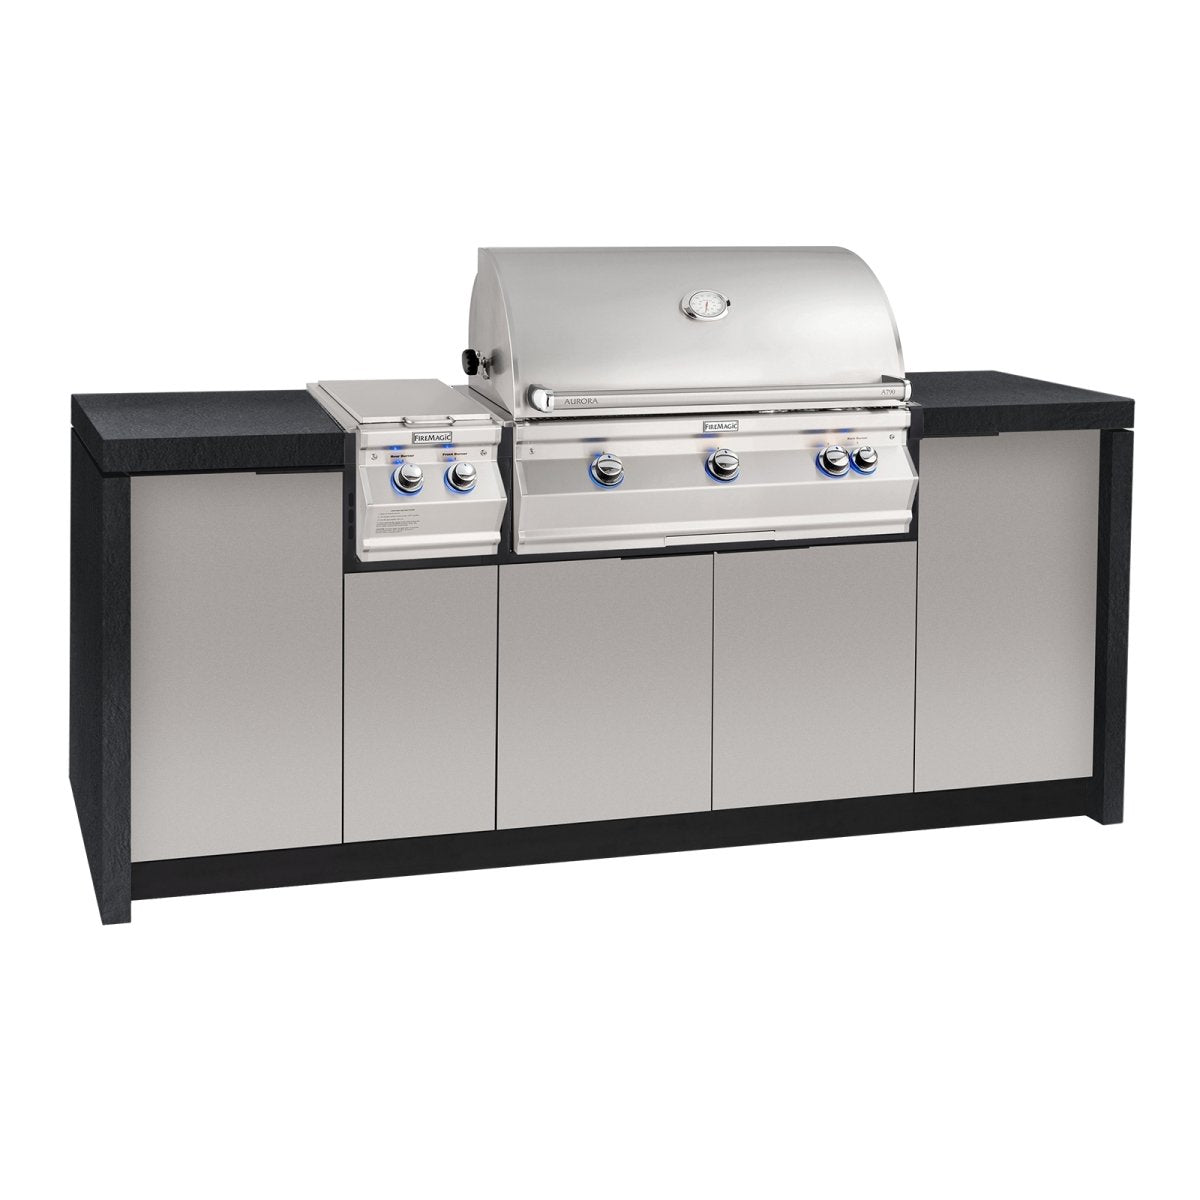 Fire Magic Grills Island System to suit A790i with Single Side Burner - Outdoorium